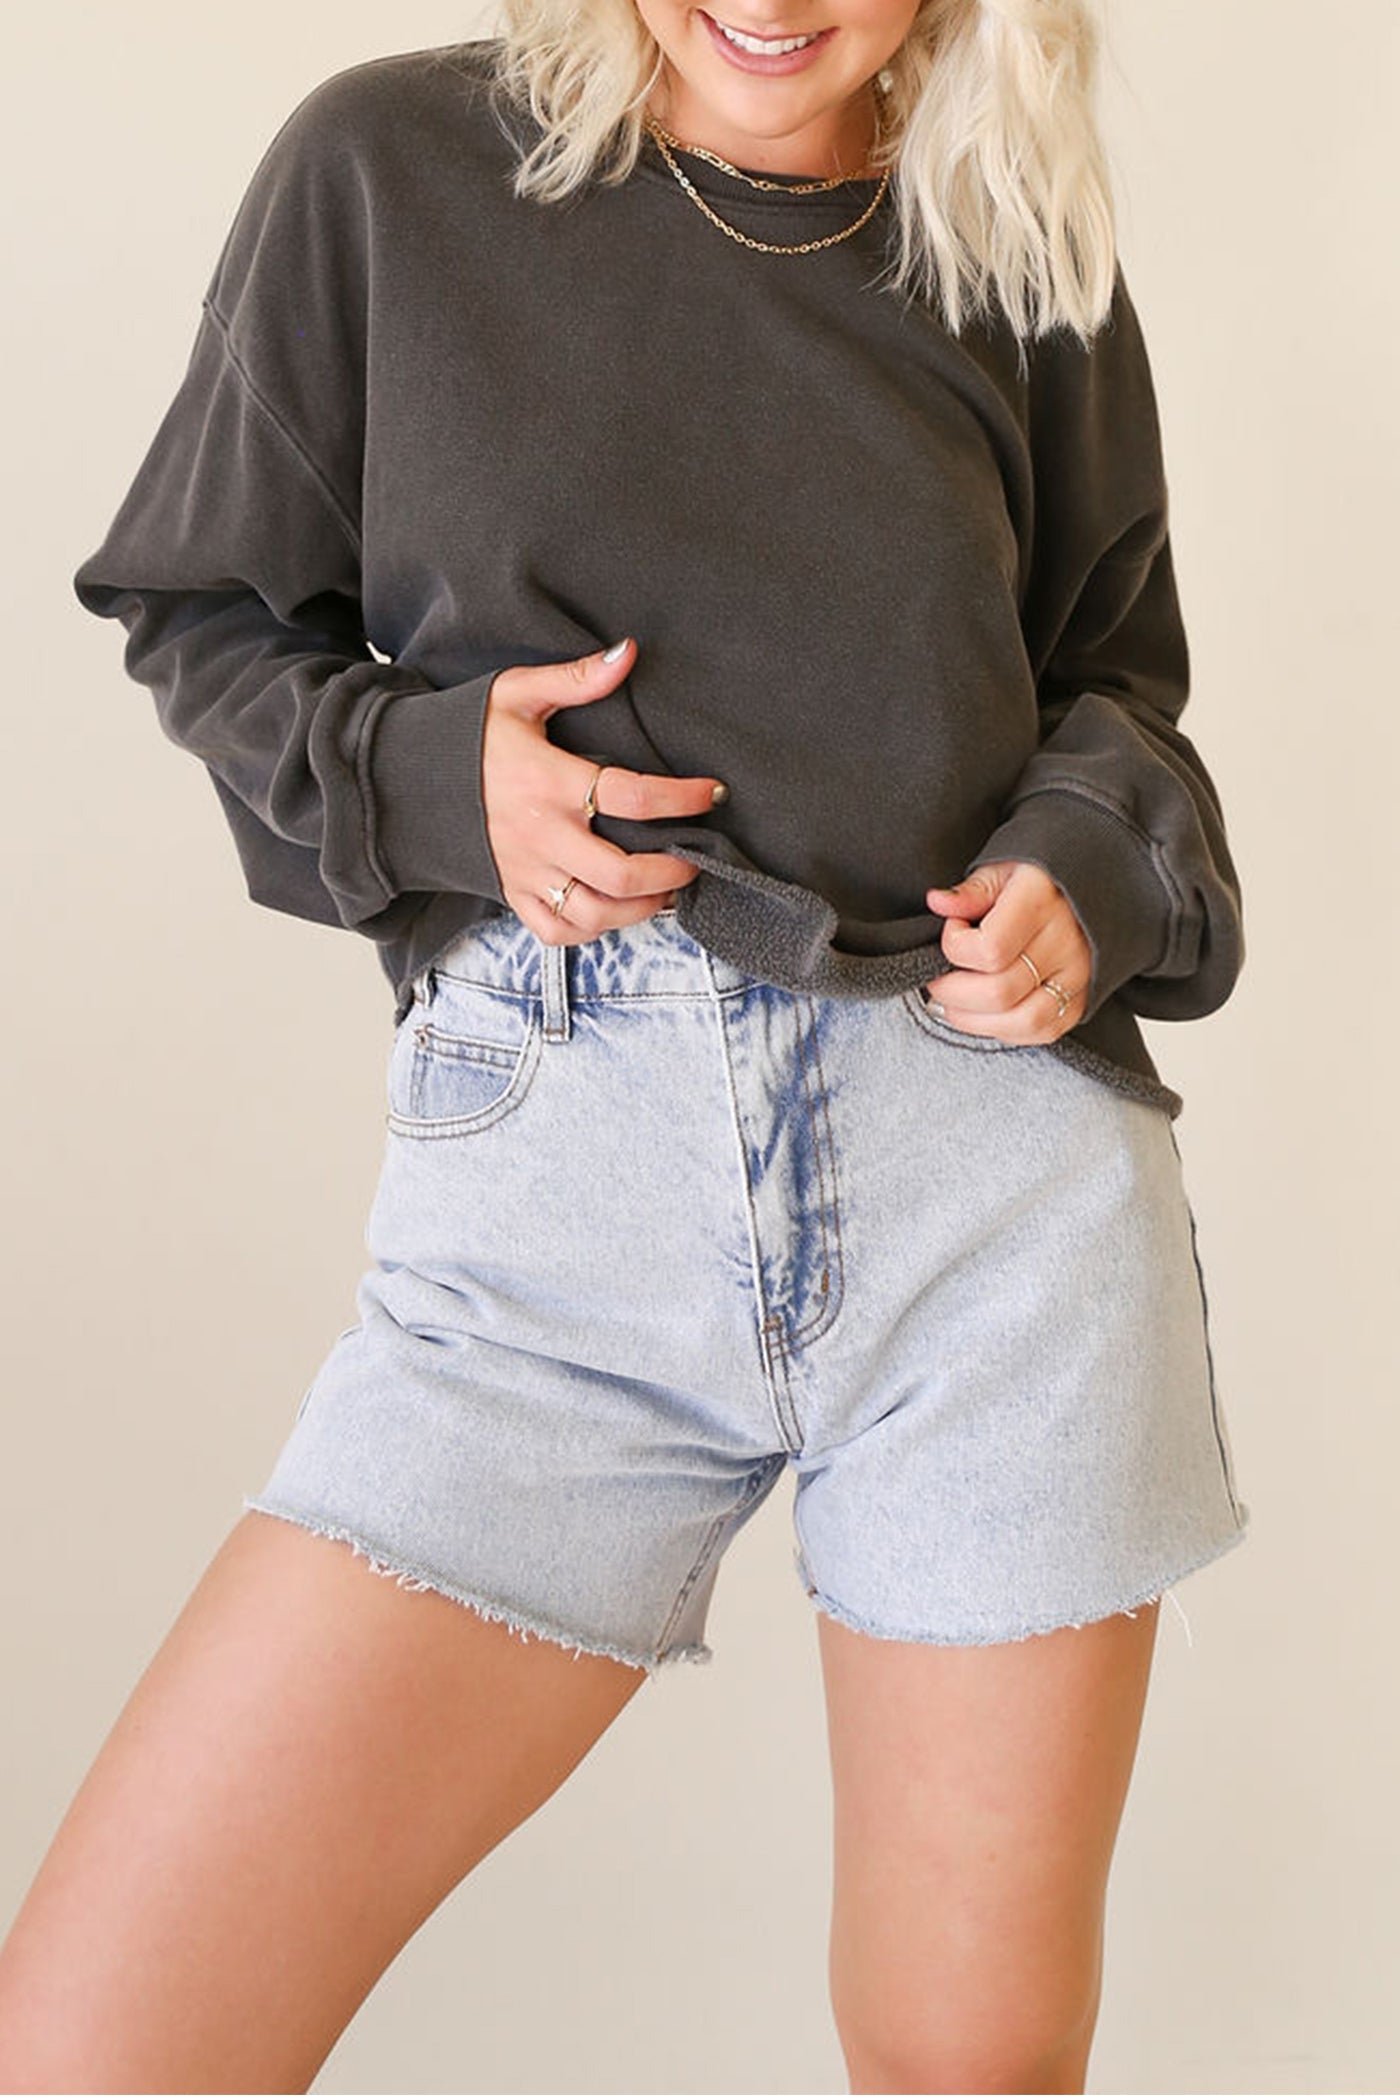 Not Much Relaxed Crop Sweater